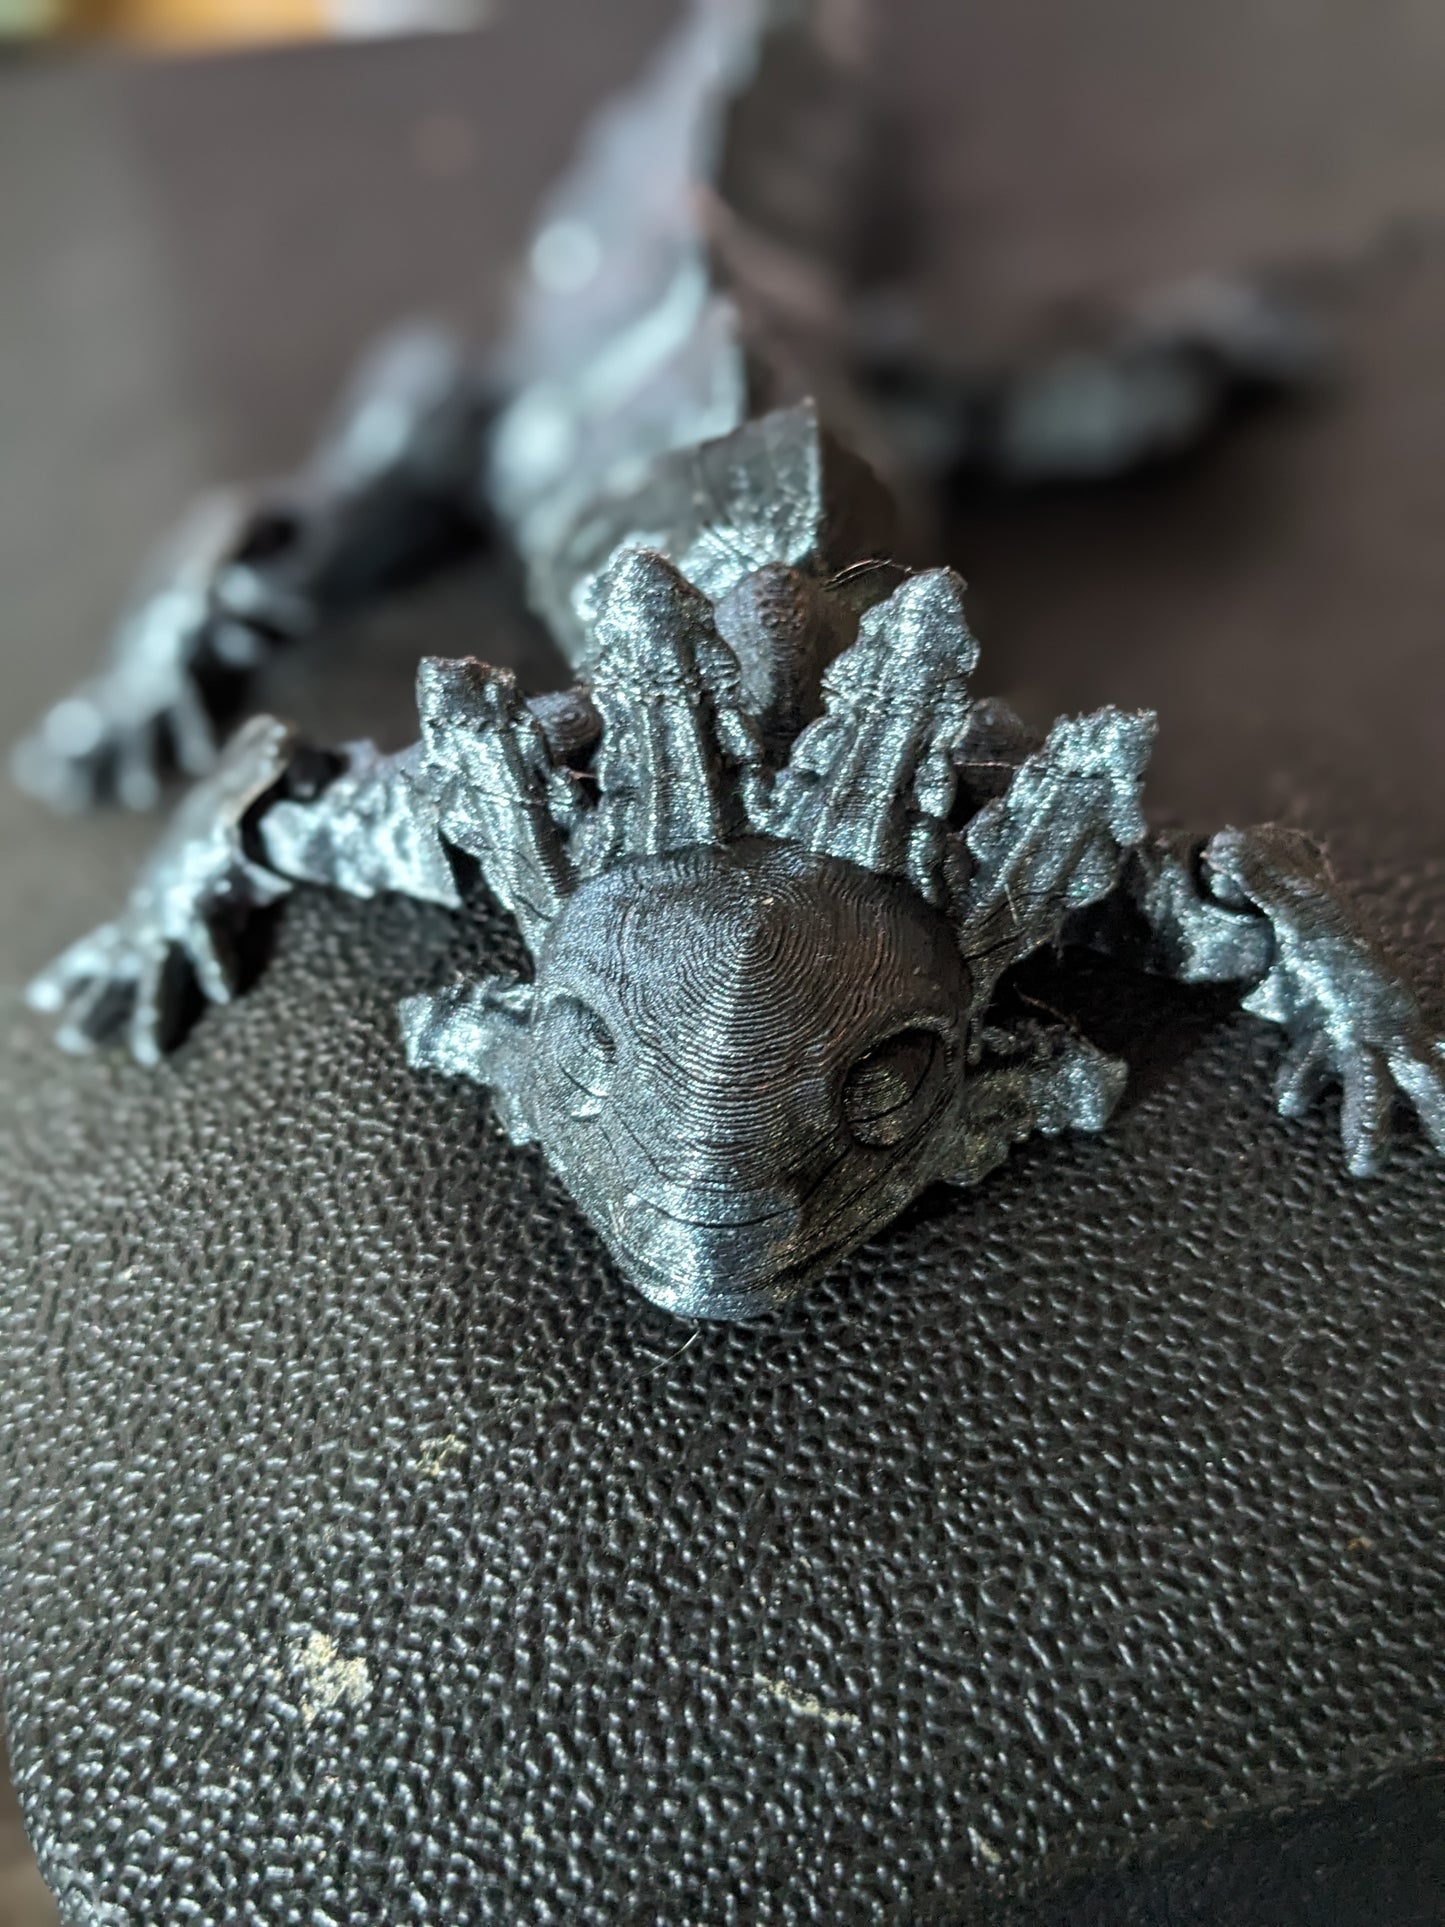 Articulated 3D Printed Familiars